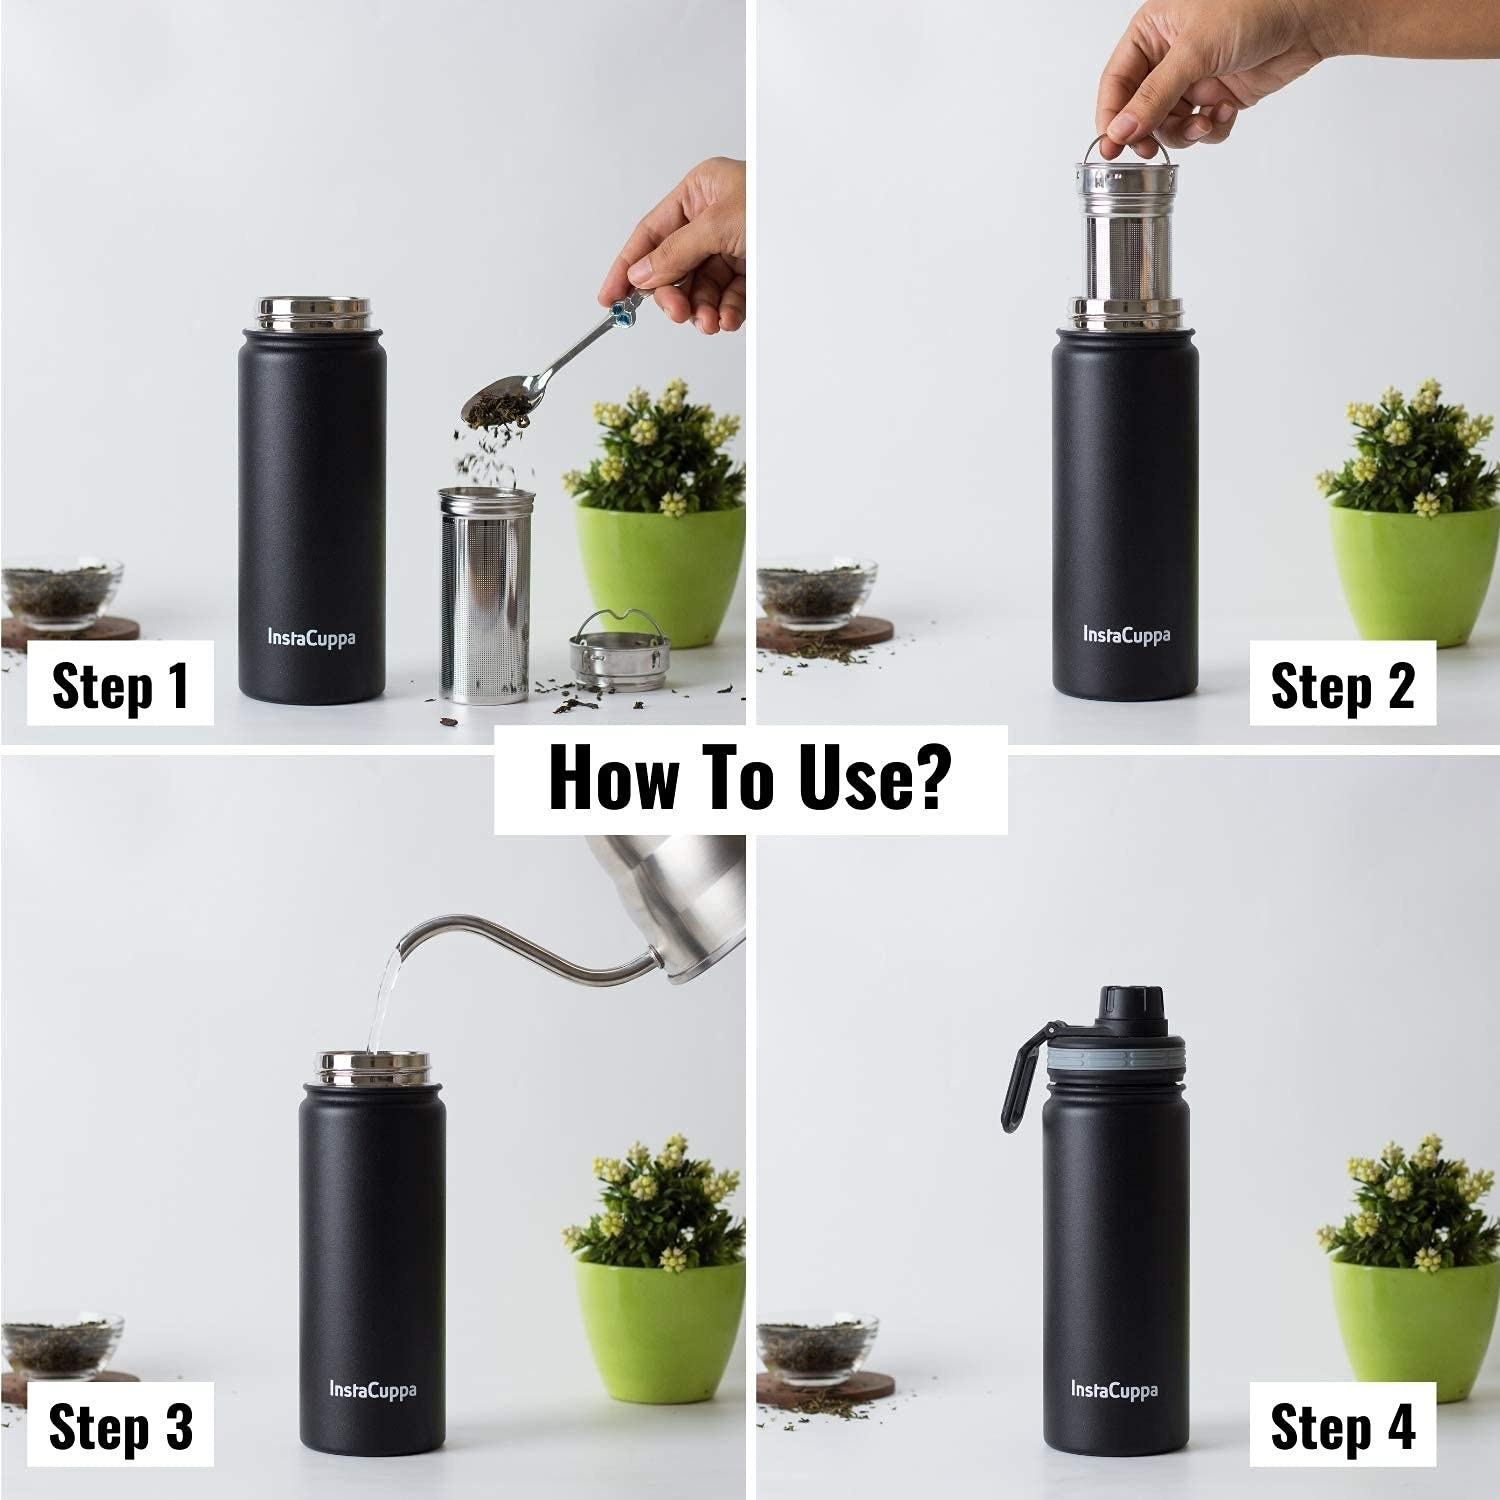 Instructions on how to use the infuser bottle